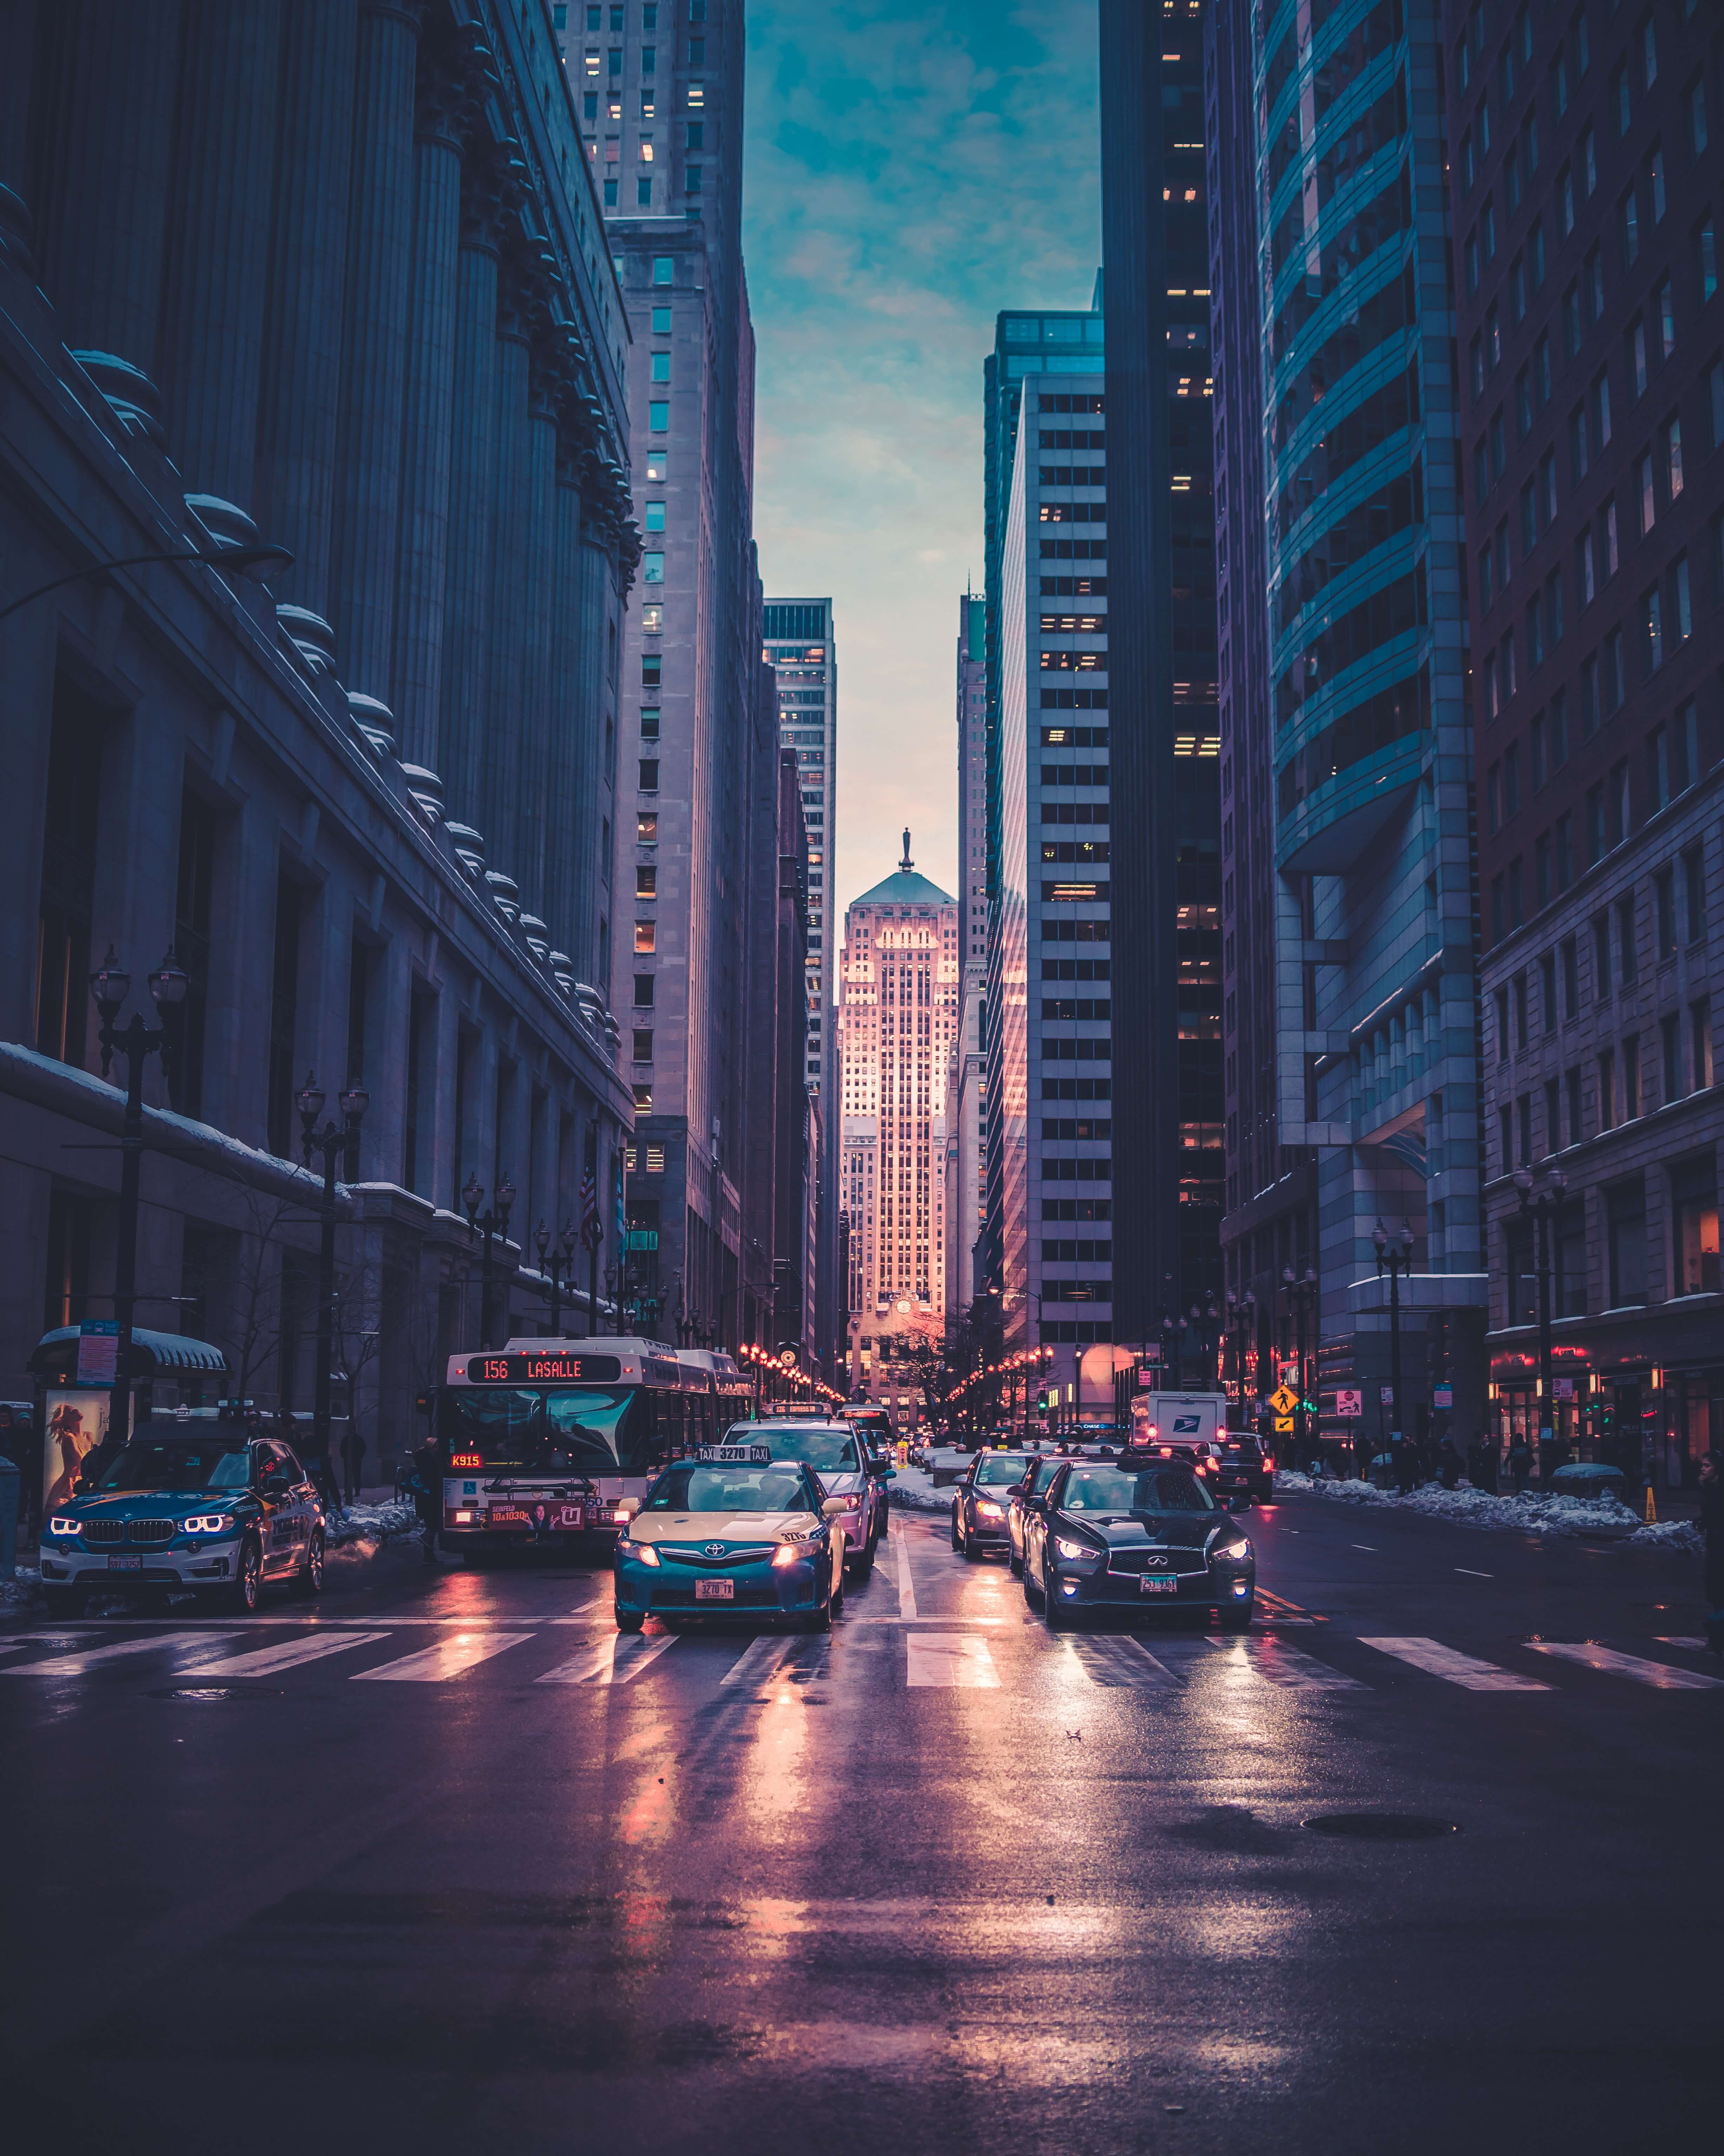 New York city street bathed in evening blue light by Max Bender on Unsplash